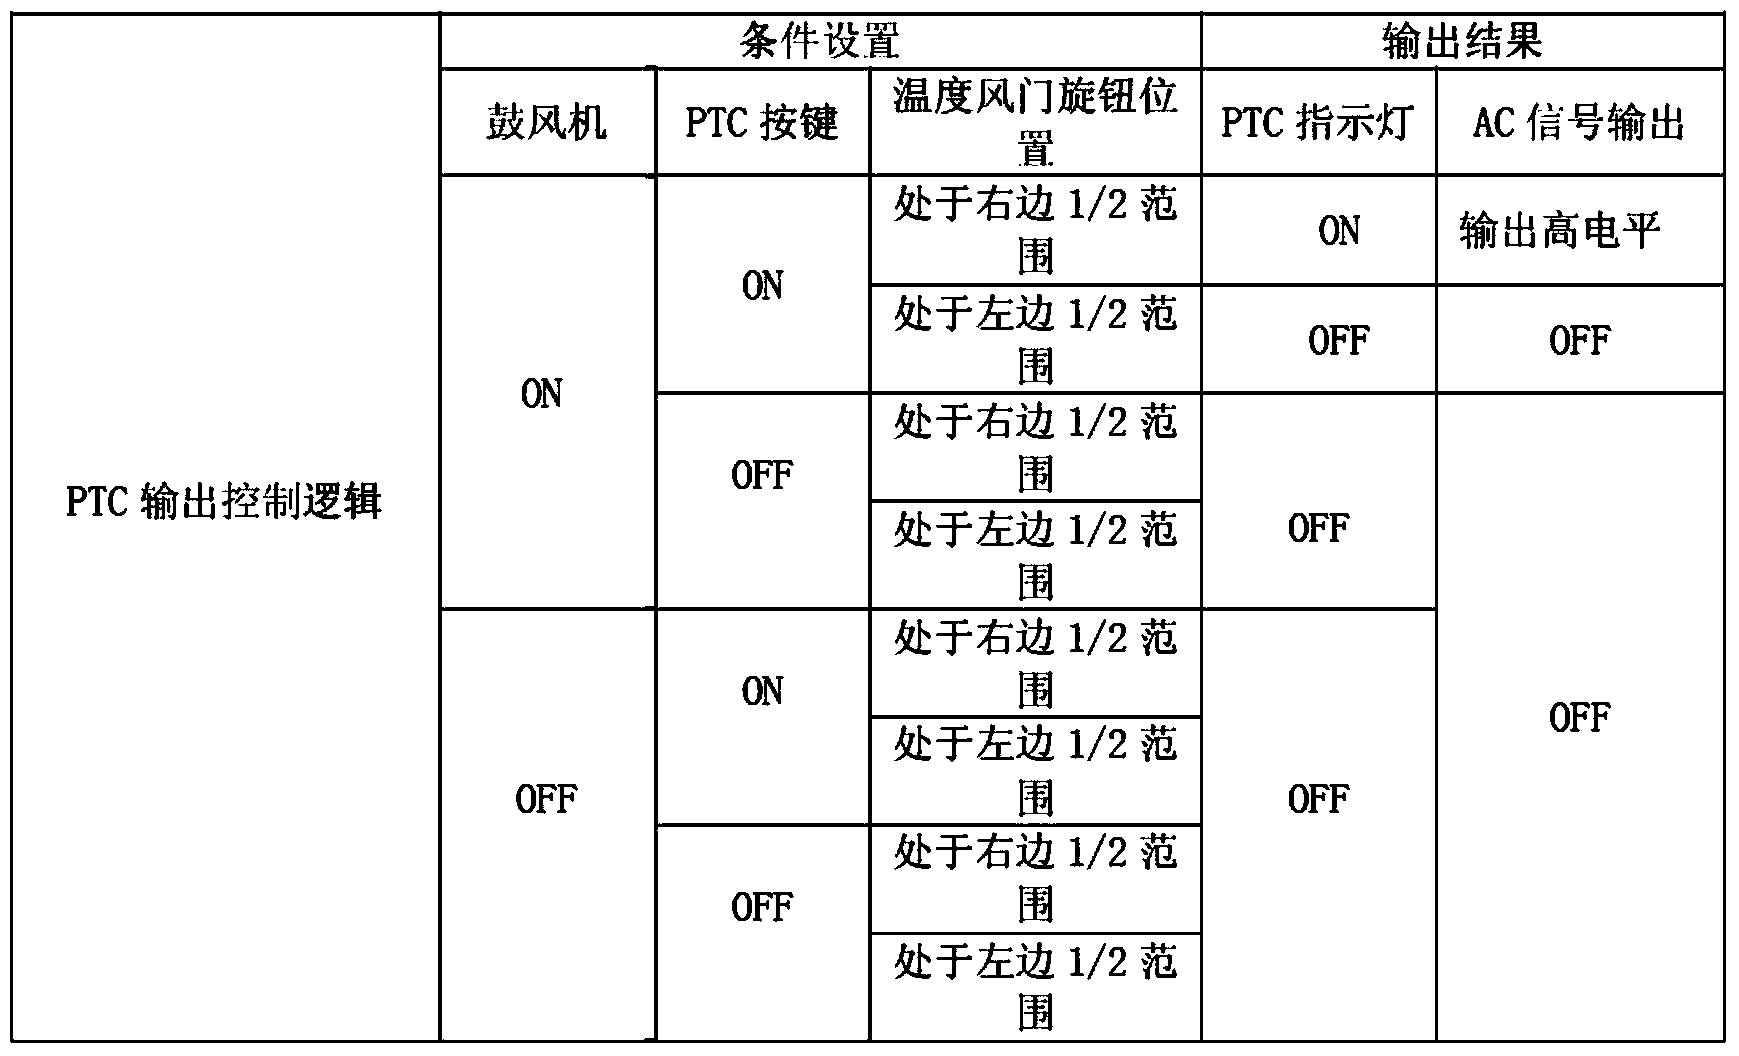 Electric-car air conditioning controller associated mechanism